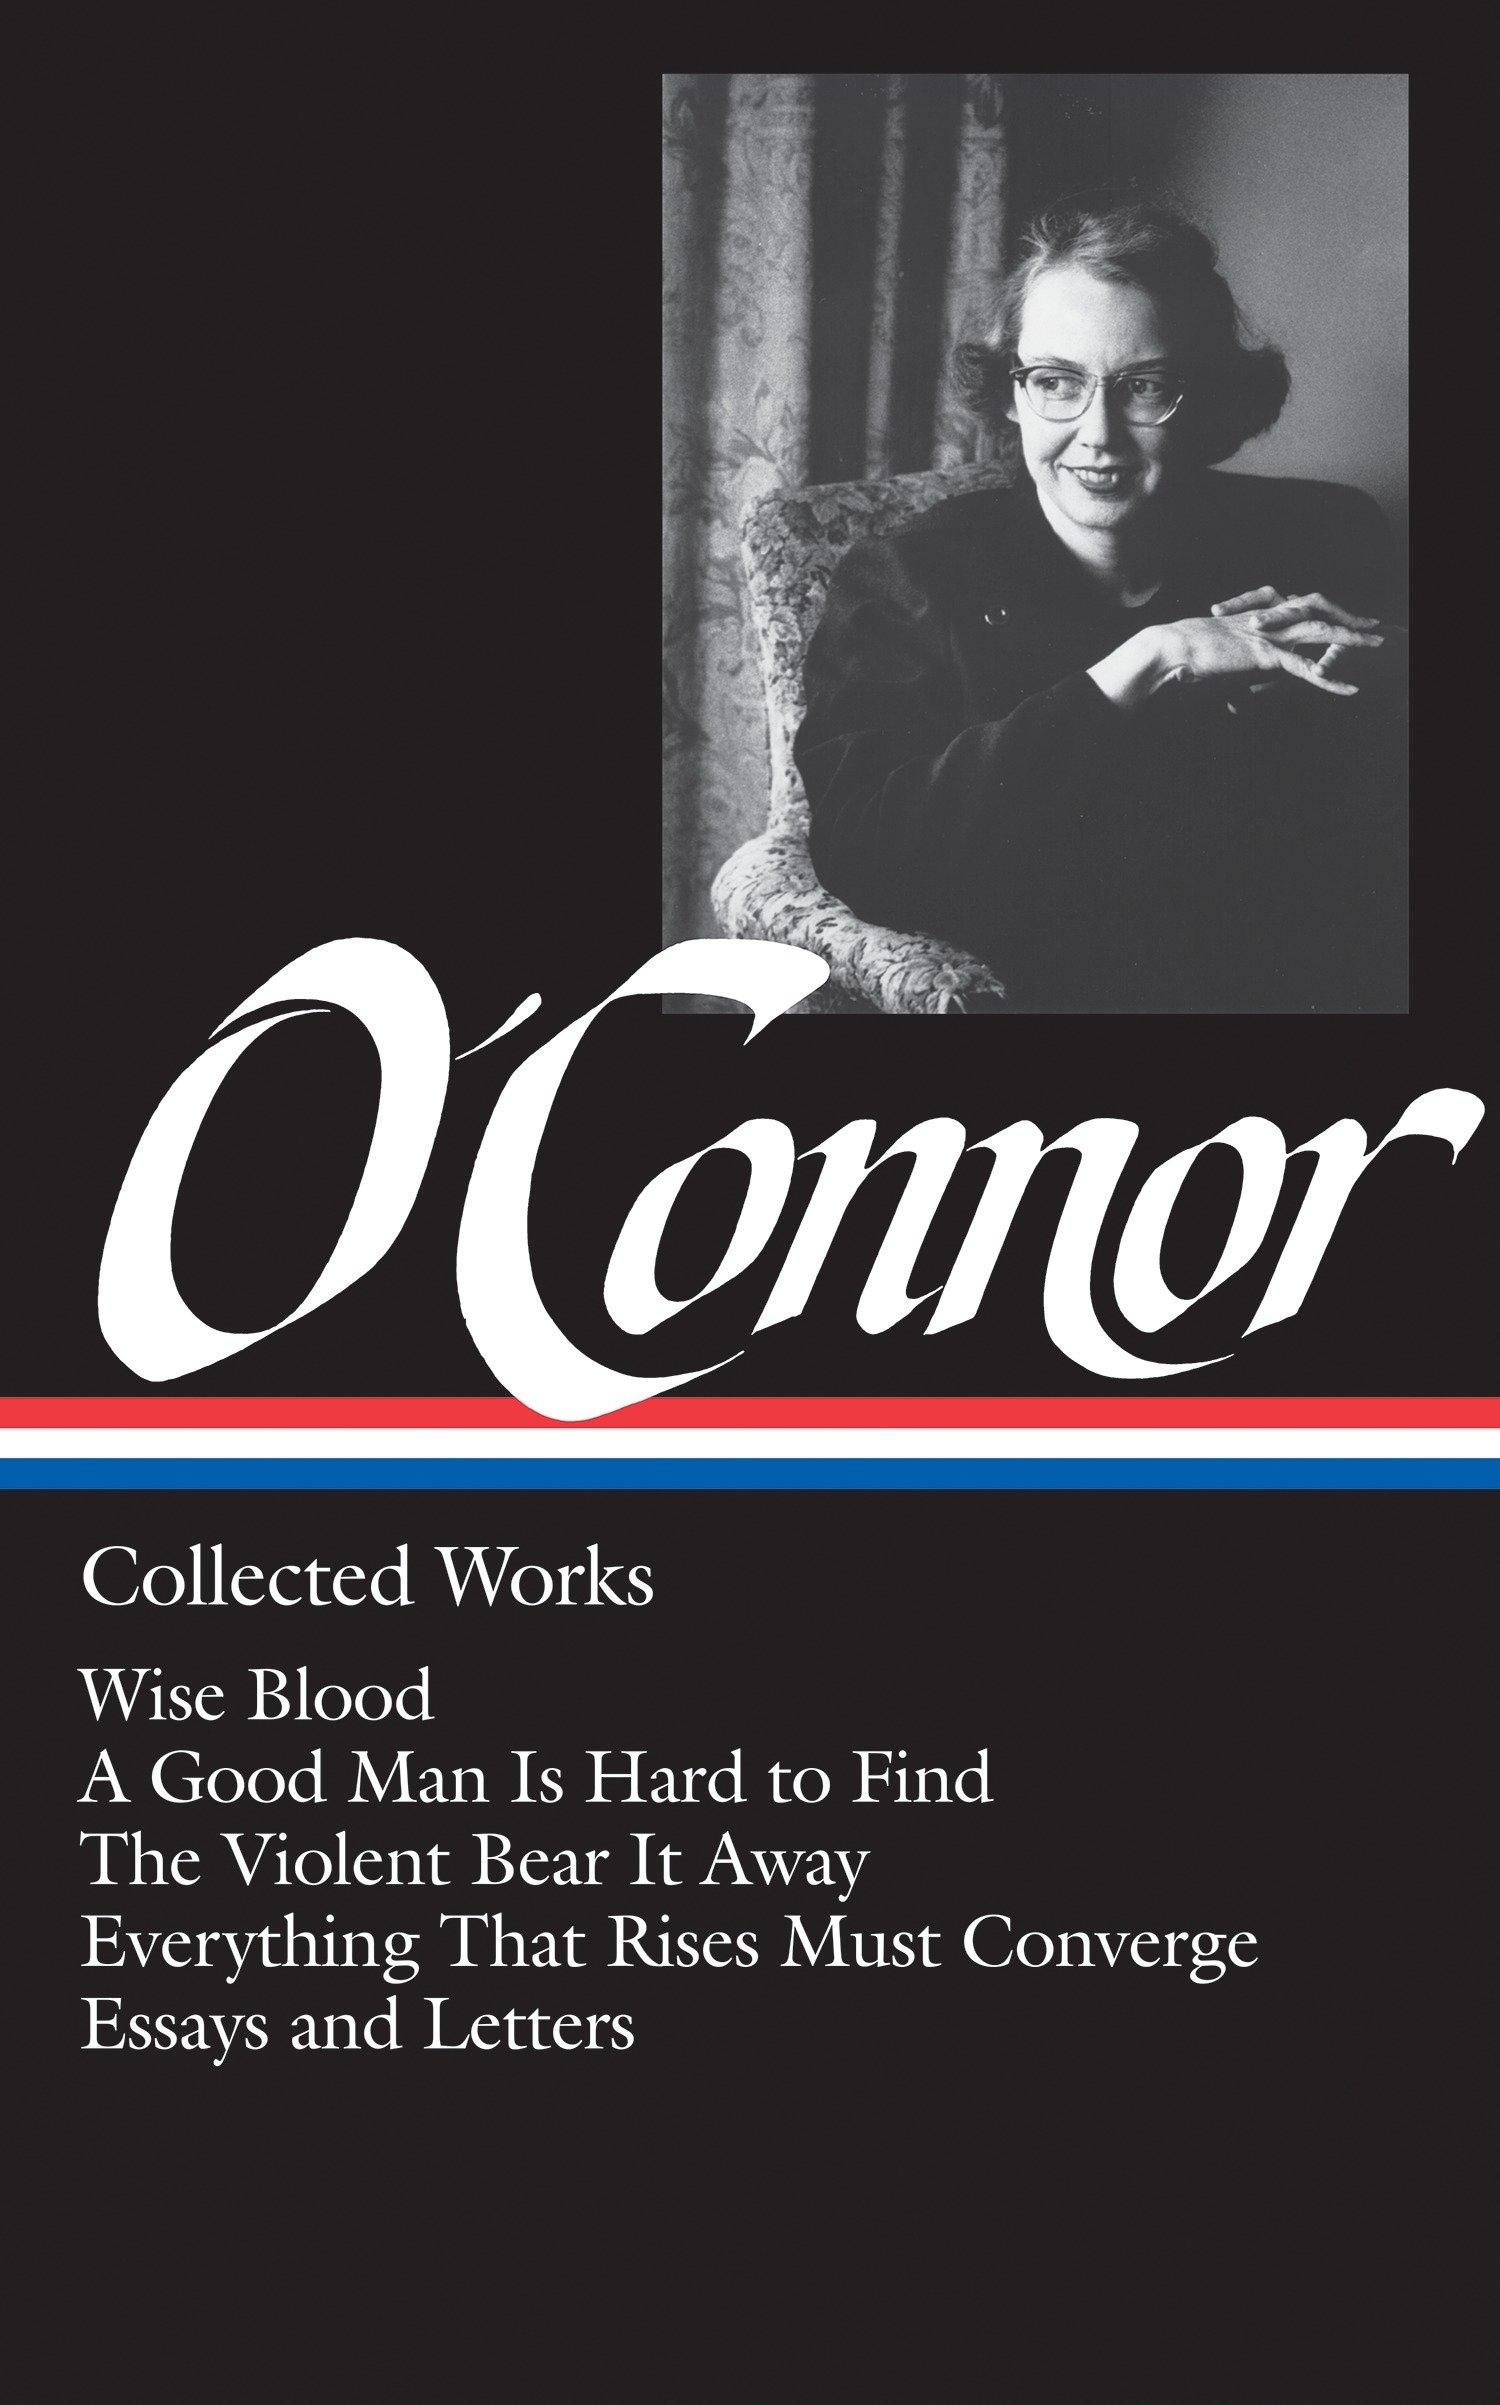 Flannery O Connor: Collected Works (LOA #39) - Flannery O Connor